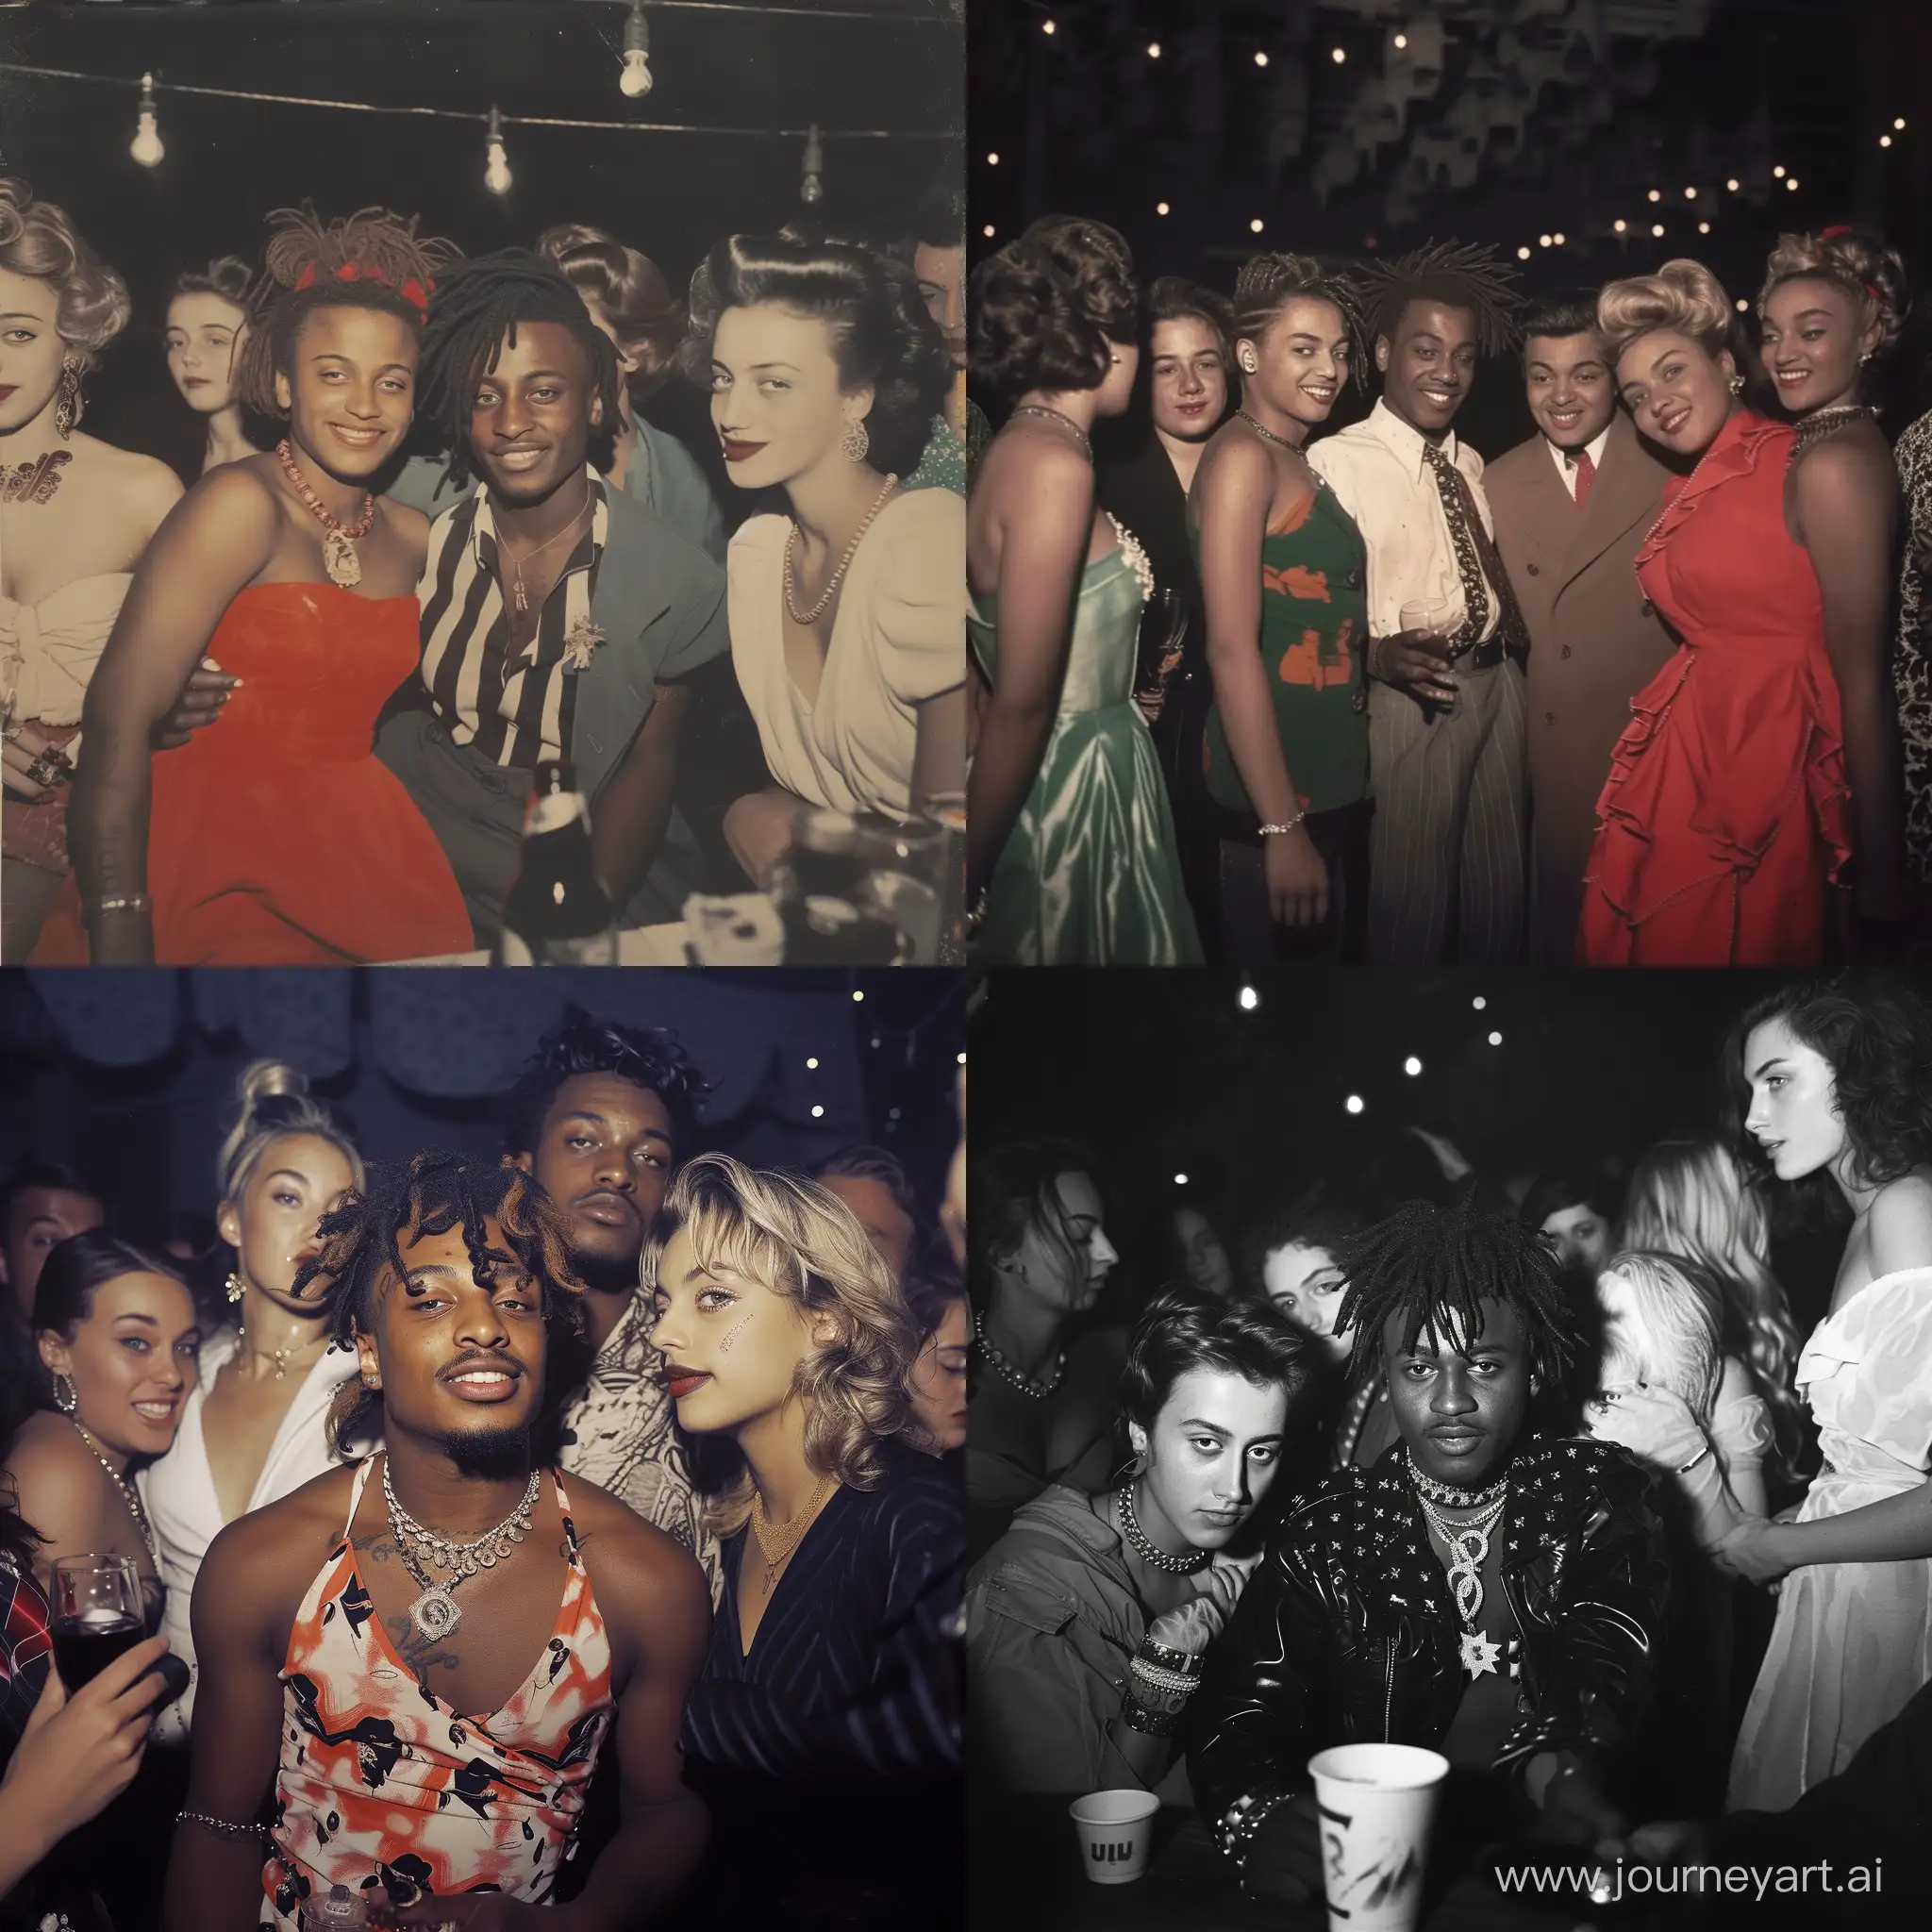 Juice-WRLD-1950s-Party-Photo-with-White-Women